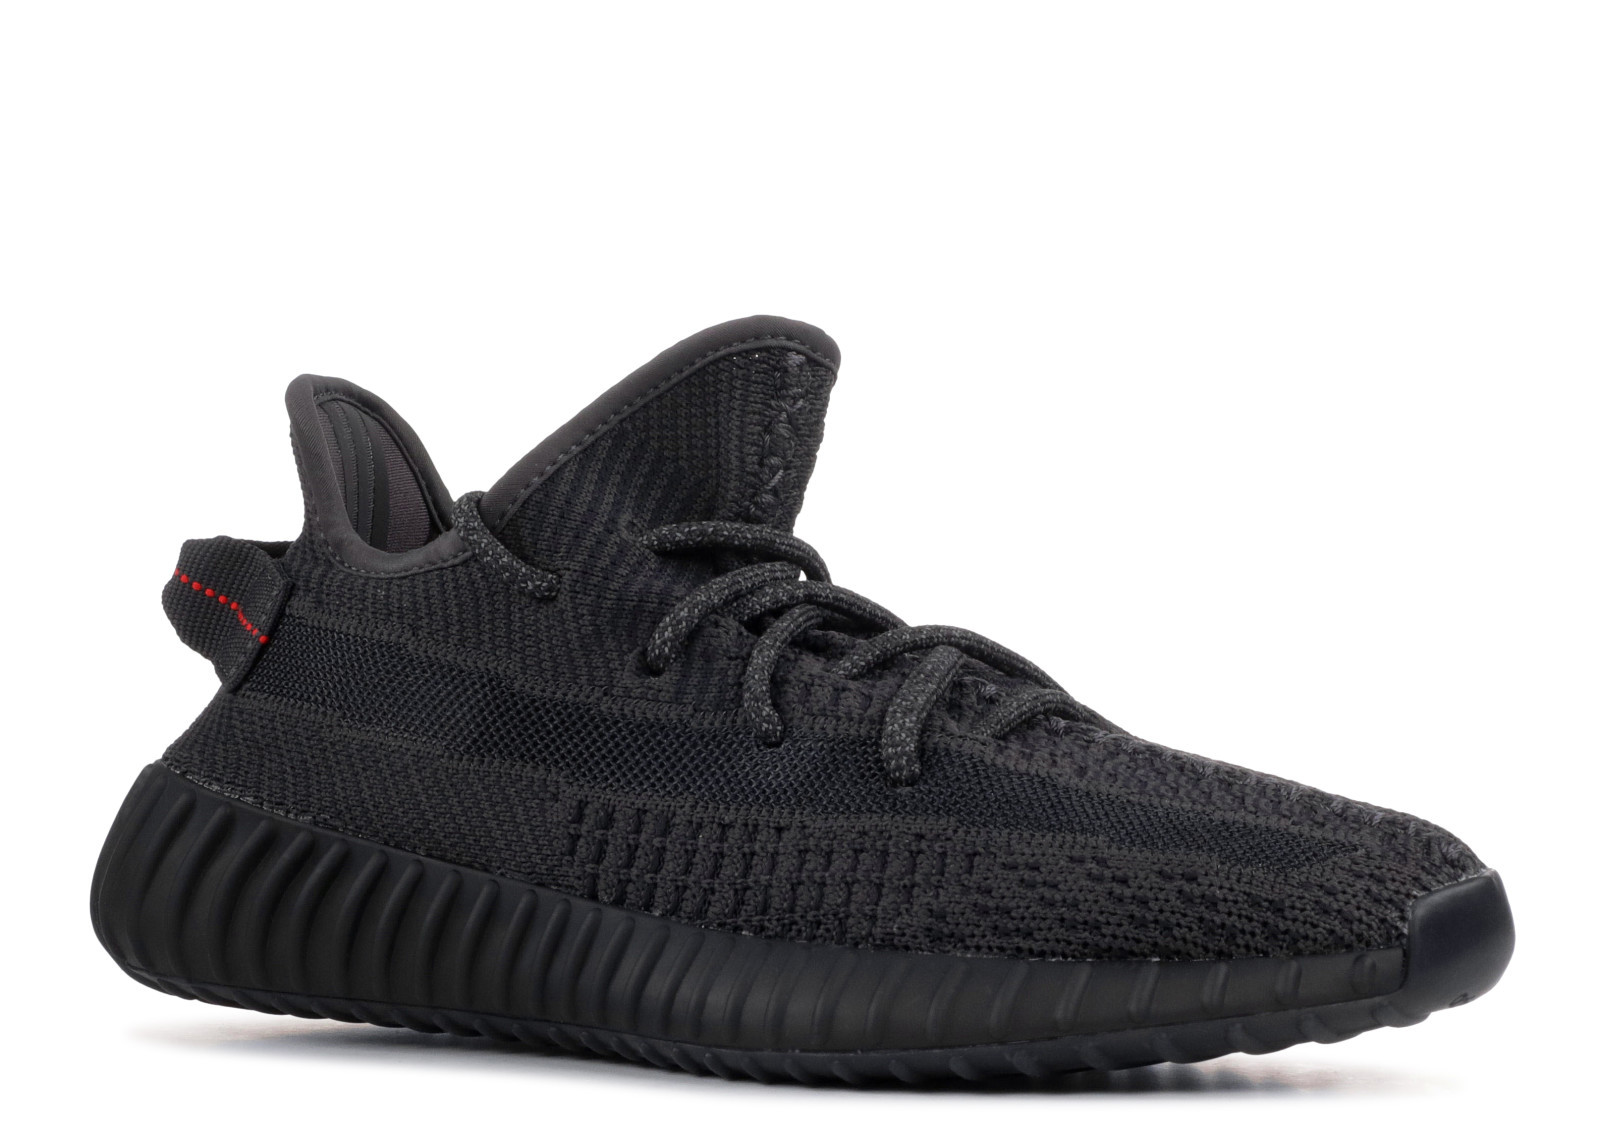 yeezy 350 black non reflective release date